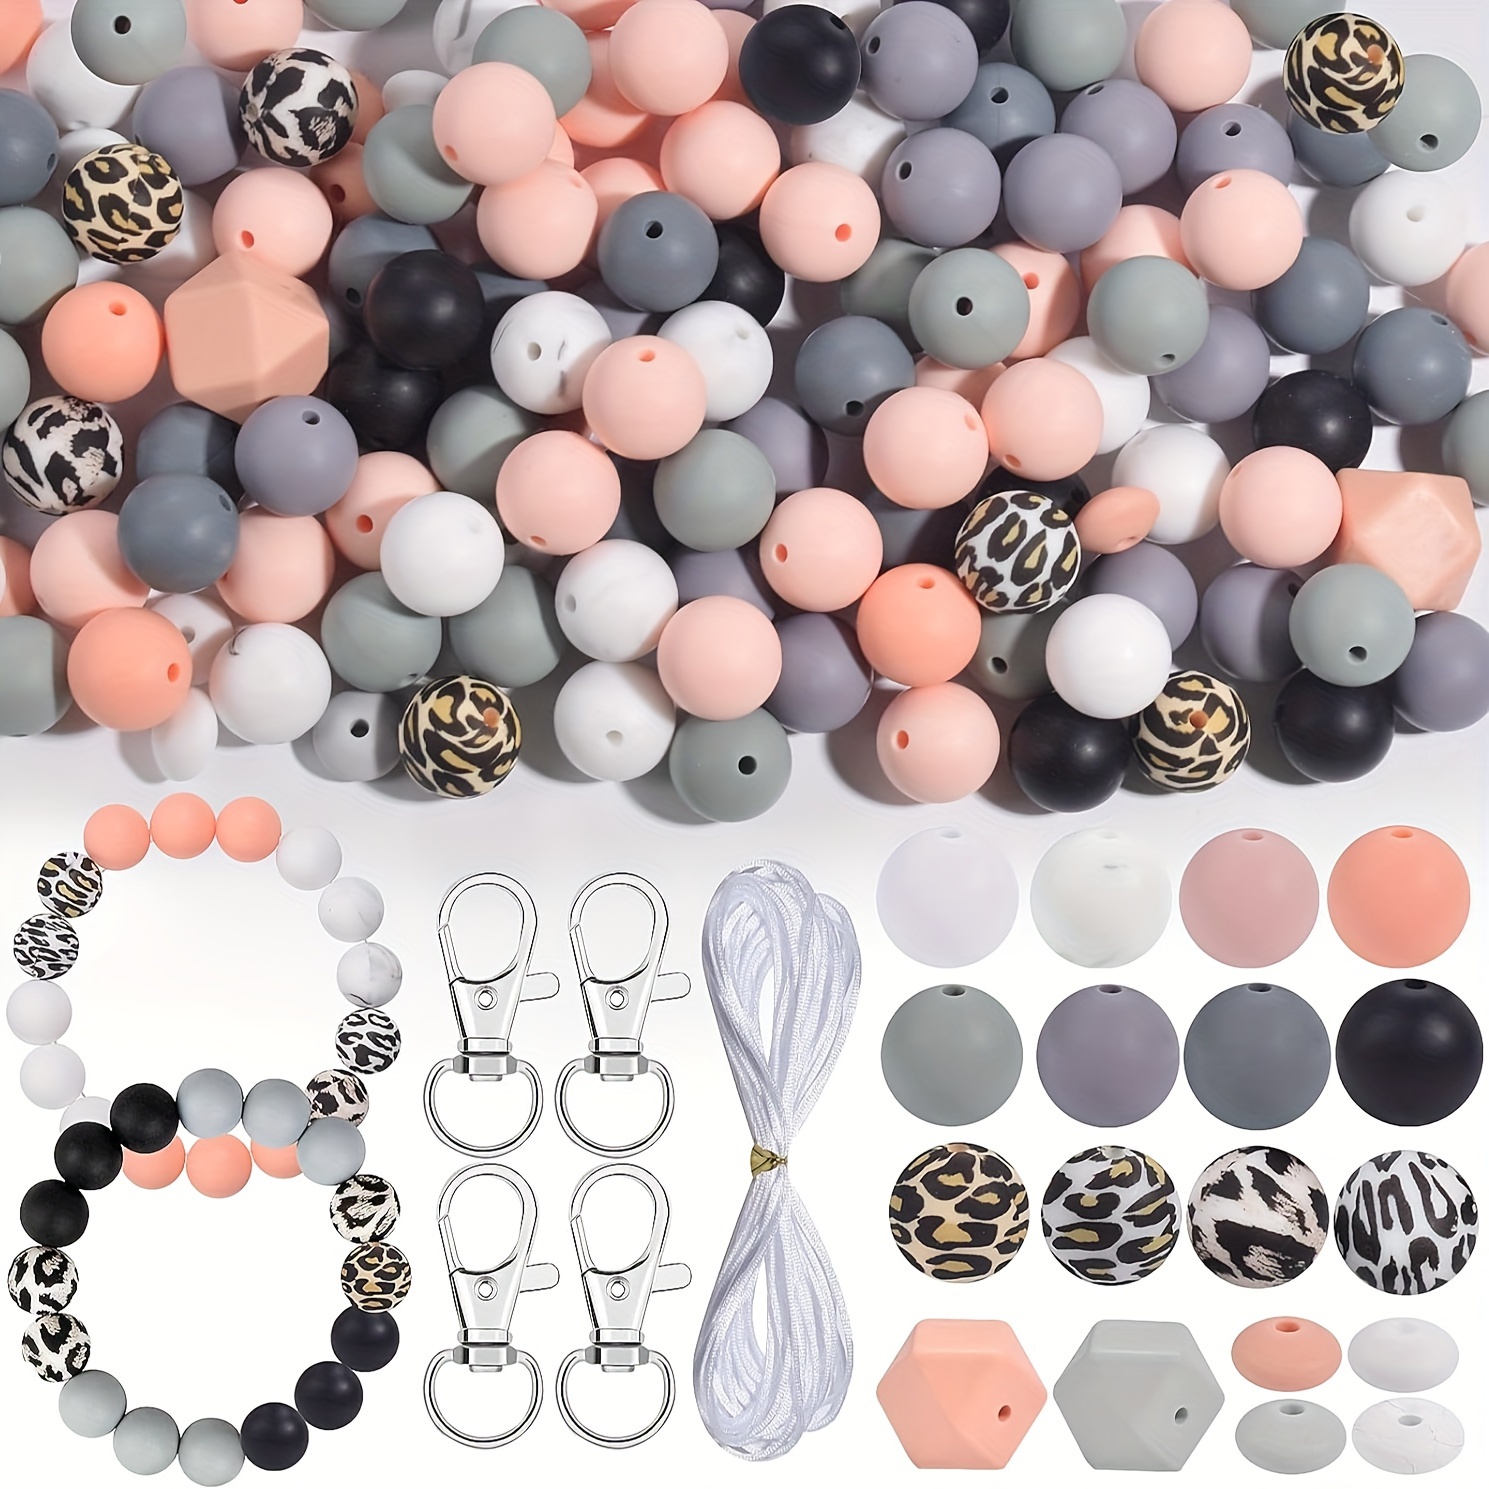 

119pcs 15mm Various Styles Silicone Loose Beads Diy Key Bag Chain Festive Party Decorations